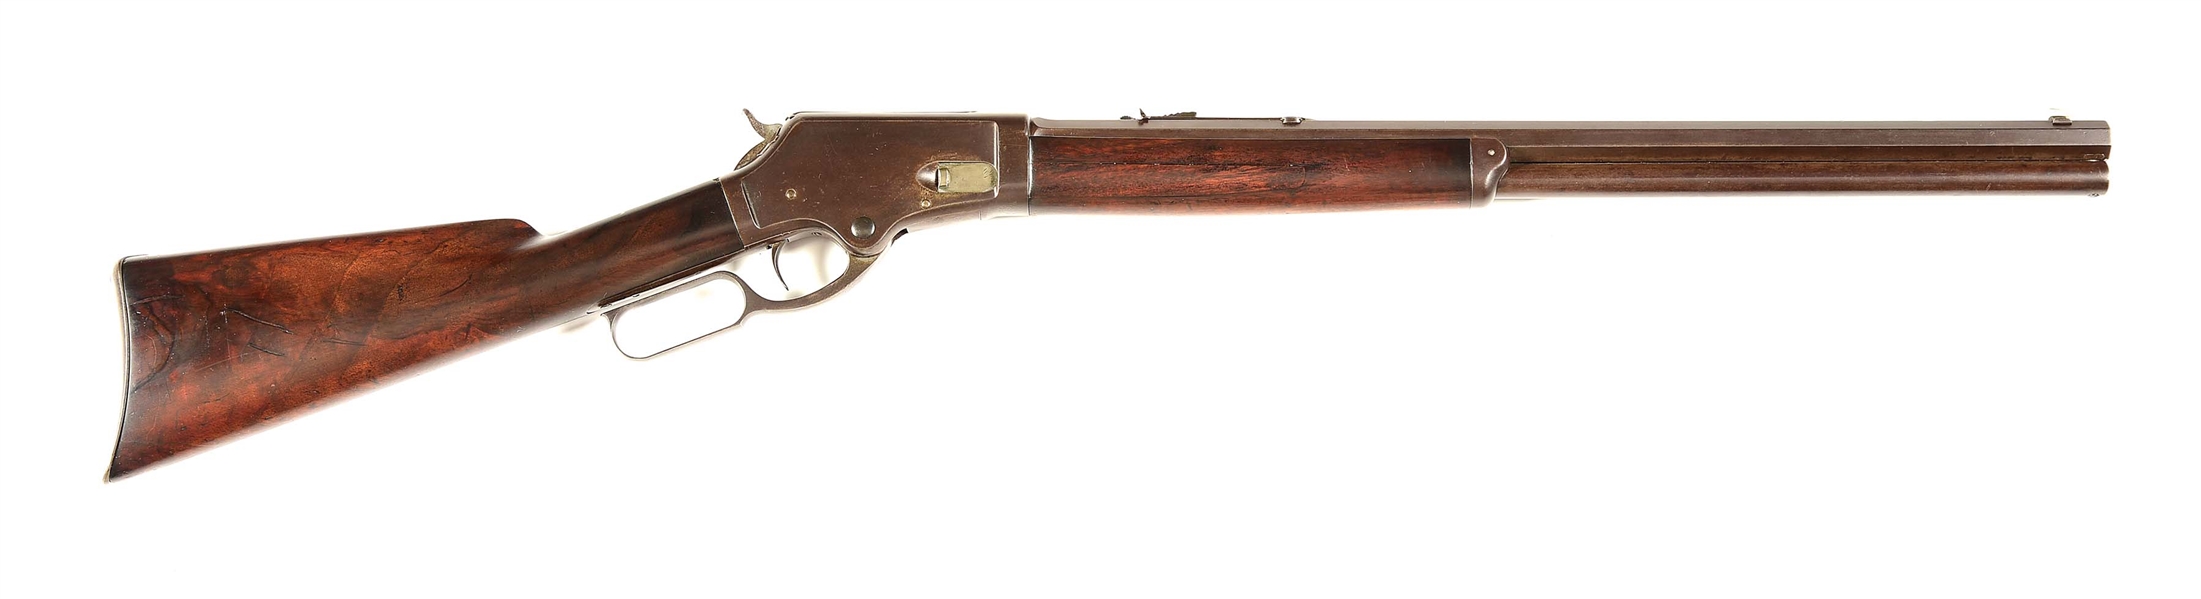 (A) MARLIN 1881 "SMOOTHBORE" LEVER-ACTION RIFLE.